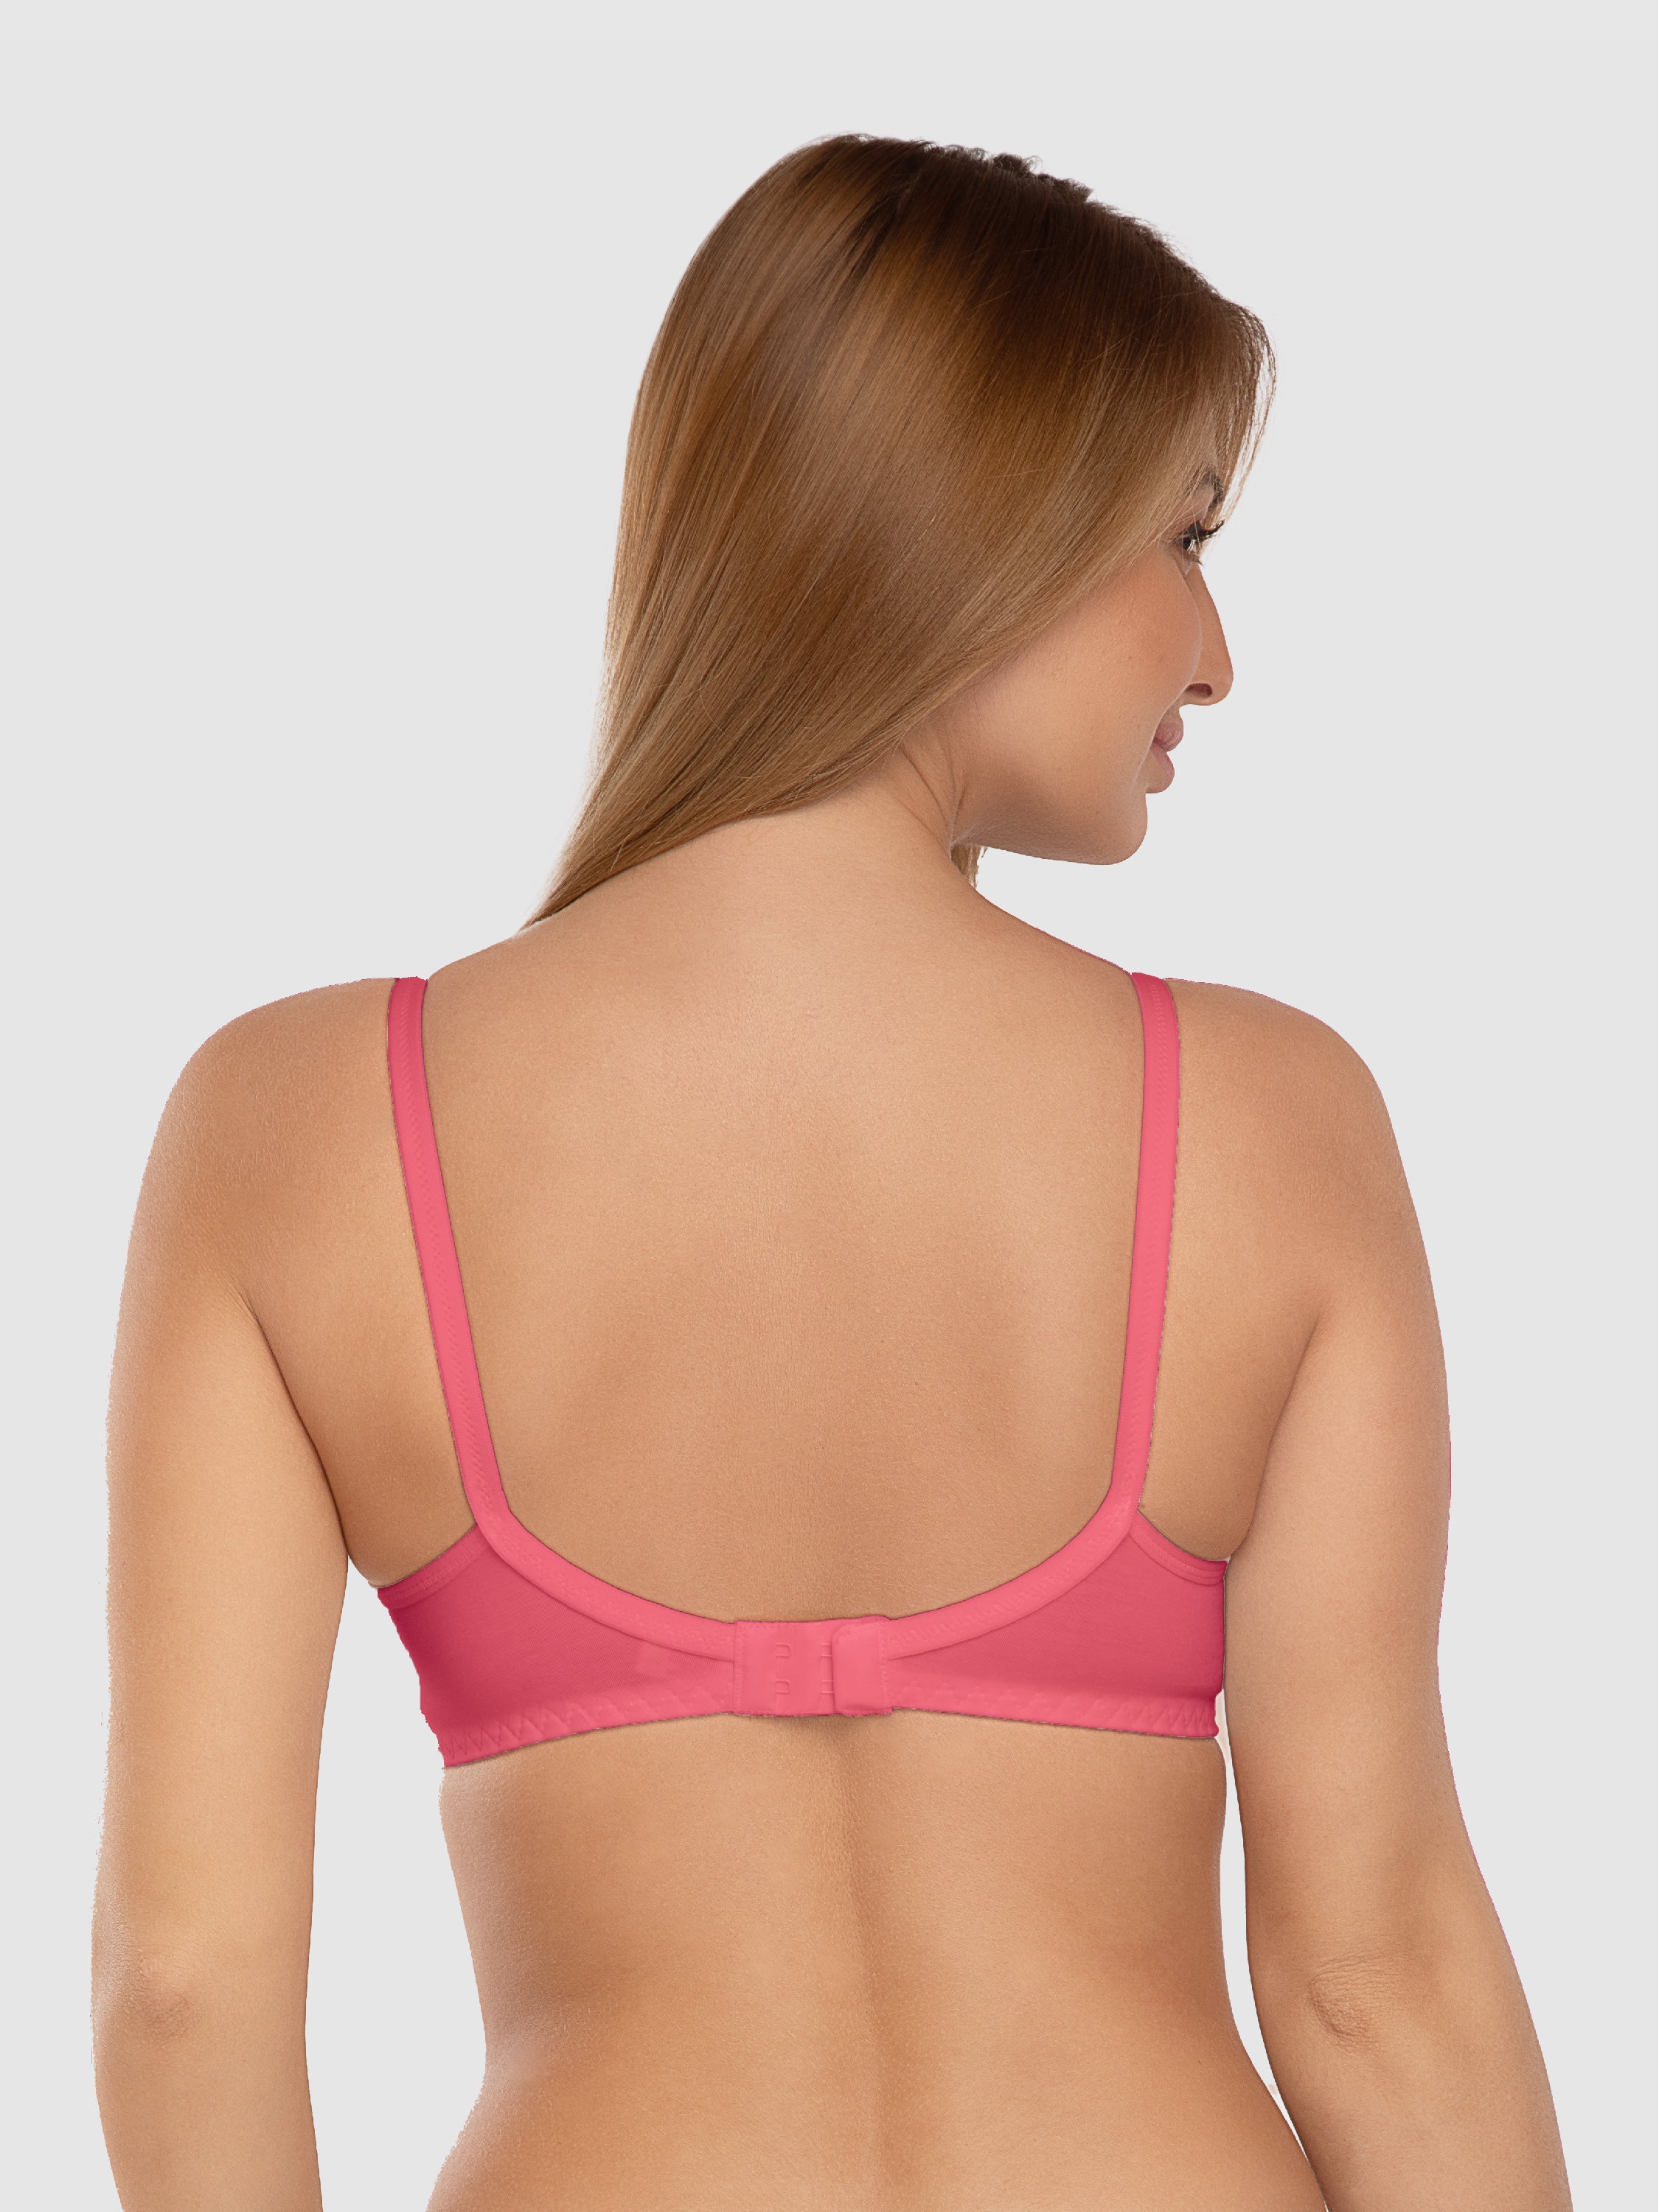 Daisy Dee Carrot Pink Non Padded Non Wired Full Coverage Bra NLBLA-Carrot